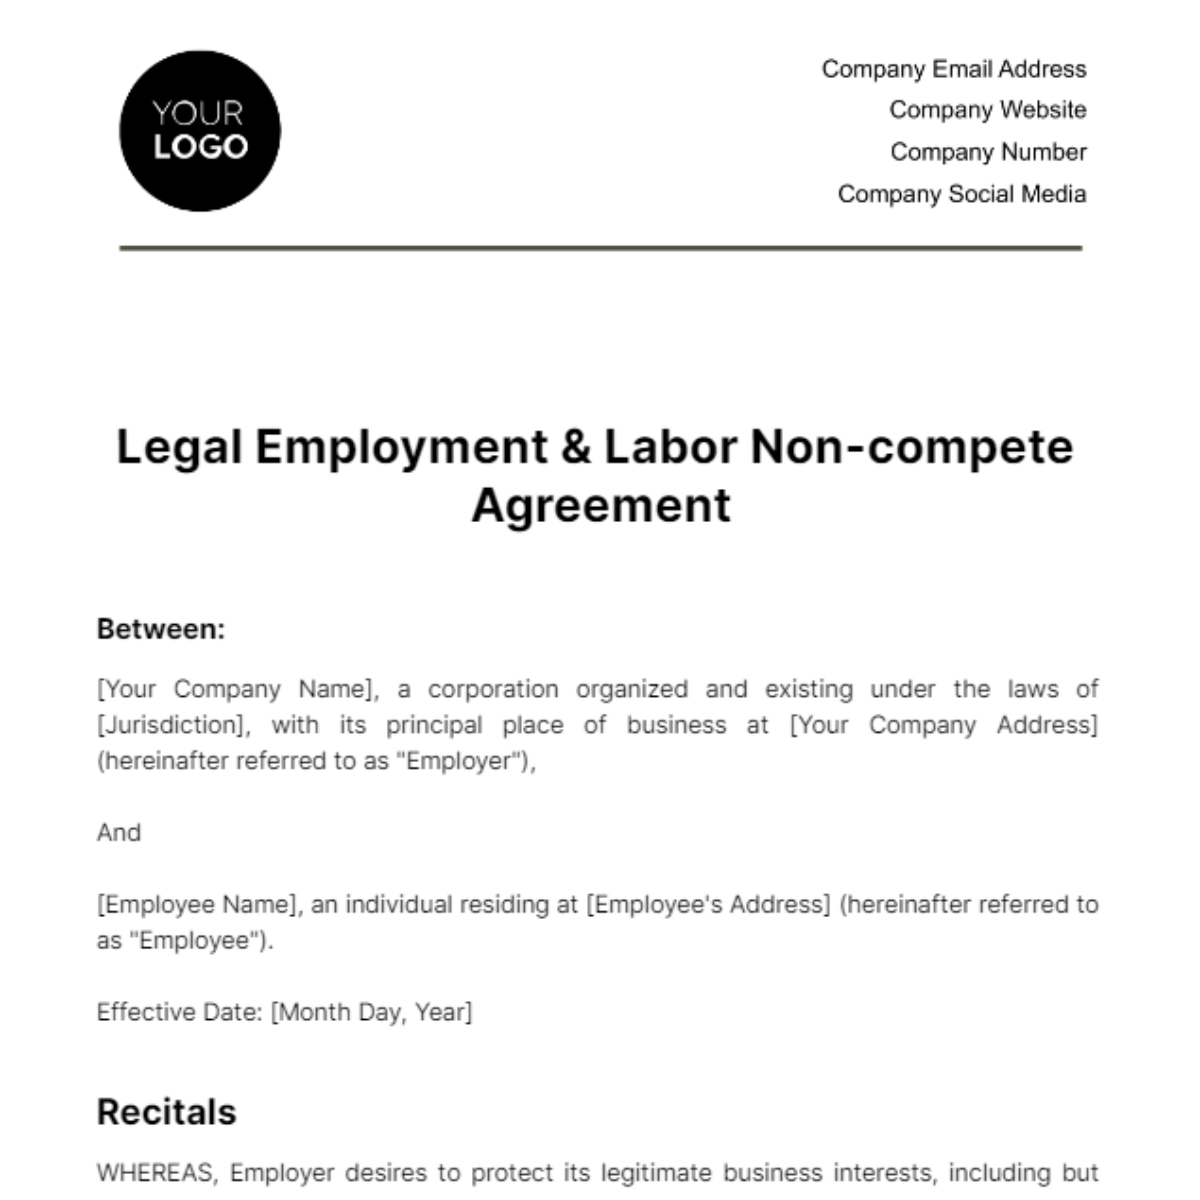 Free Legal Employment & Labor Non-compete Agreement Template